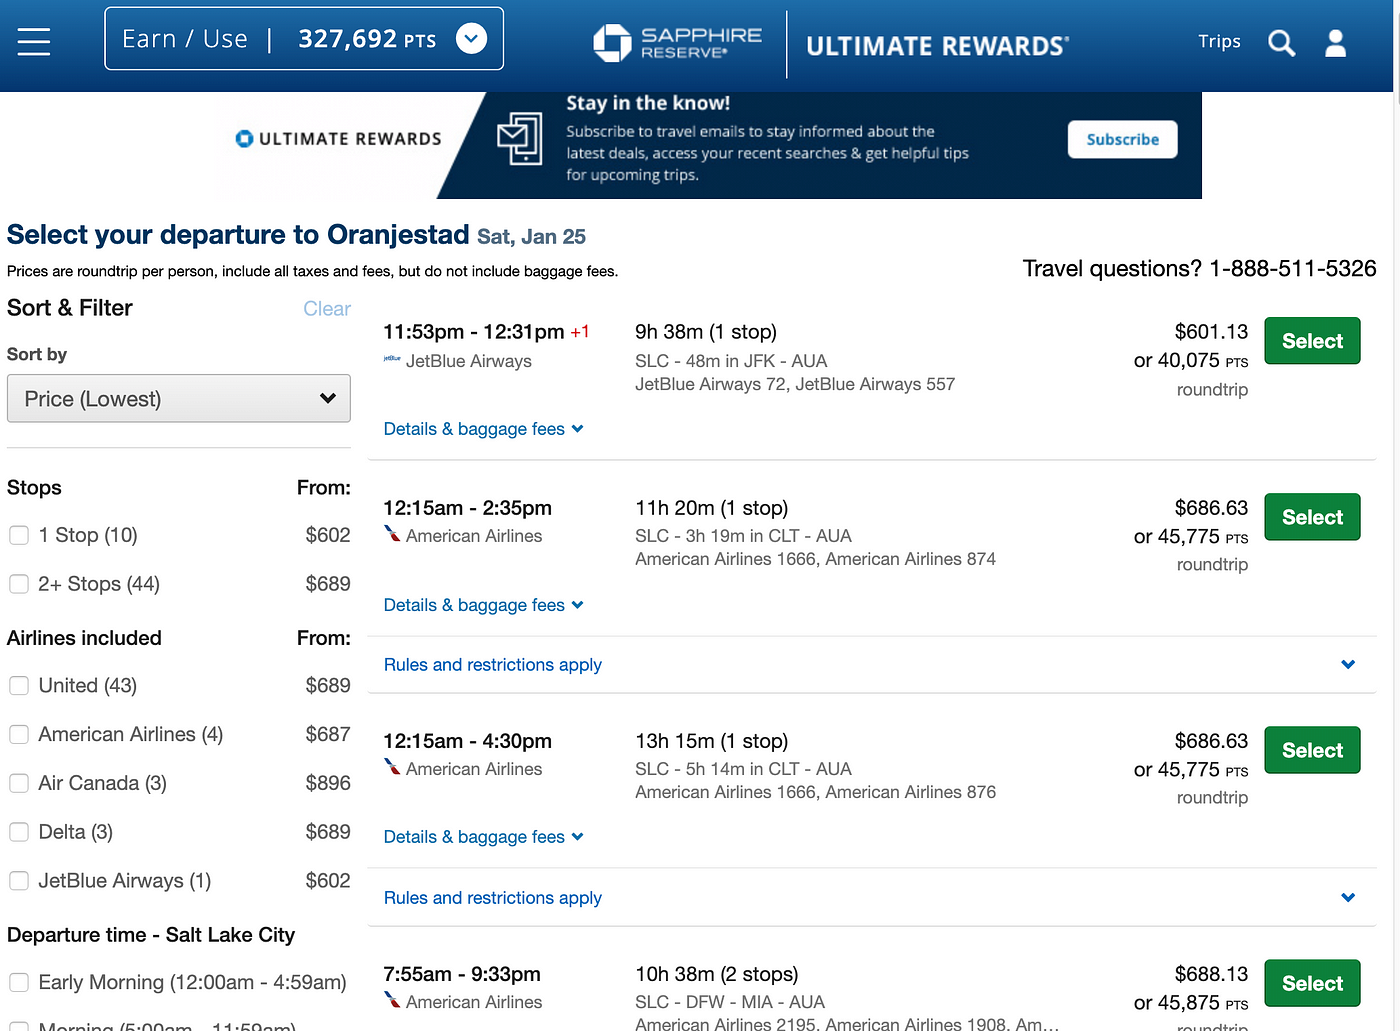 Step by Step guide to booking a ticket or redeeming points through the Chase  Ultimate Rewards Portal, by Amy Nollner